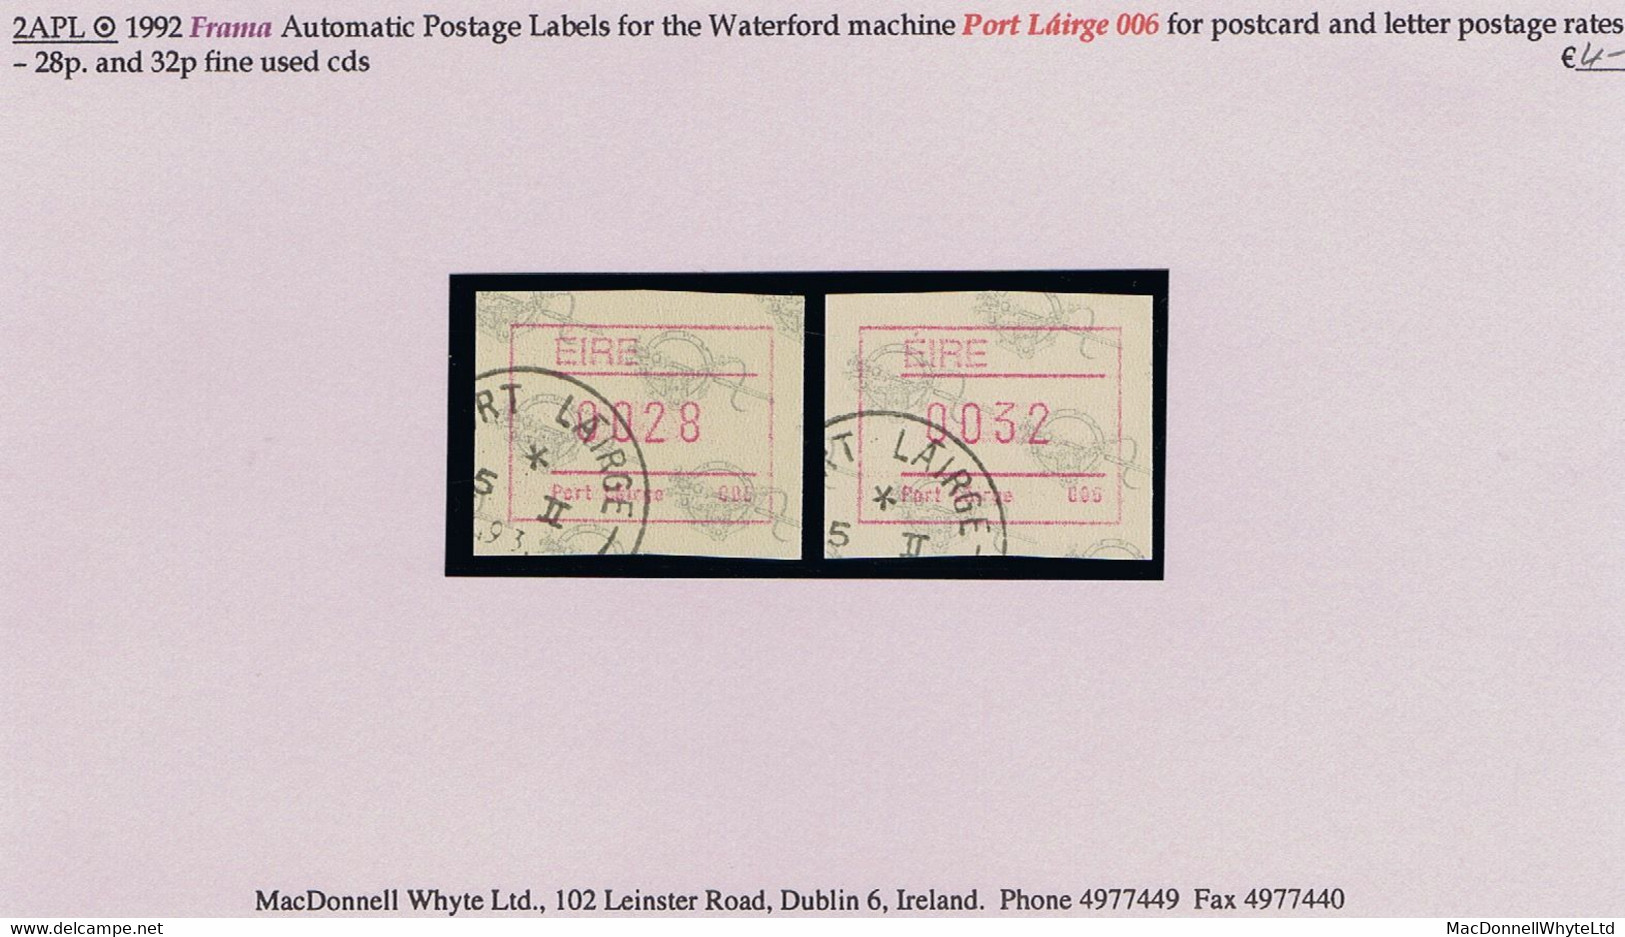 Ireland 1992 Frama Automatic Postage Labels For Waterford 006 Machine 28p Postcard Rate And 32p Letter Rate Fine Used - Vignettes D'affranchissement (Frama)